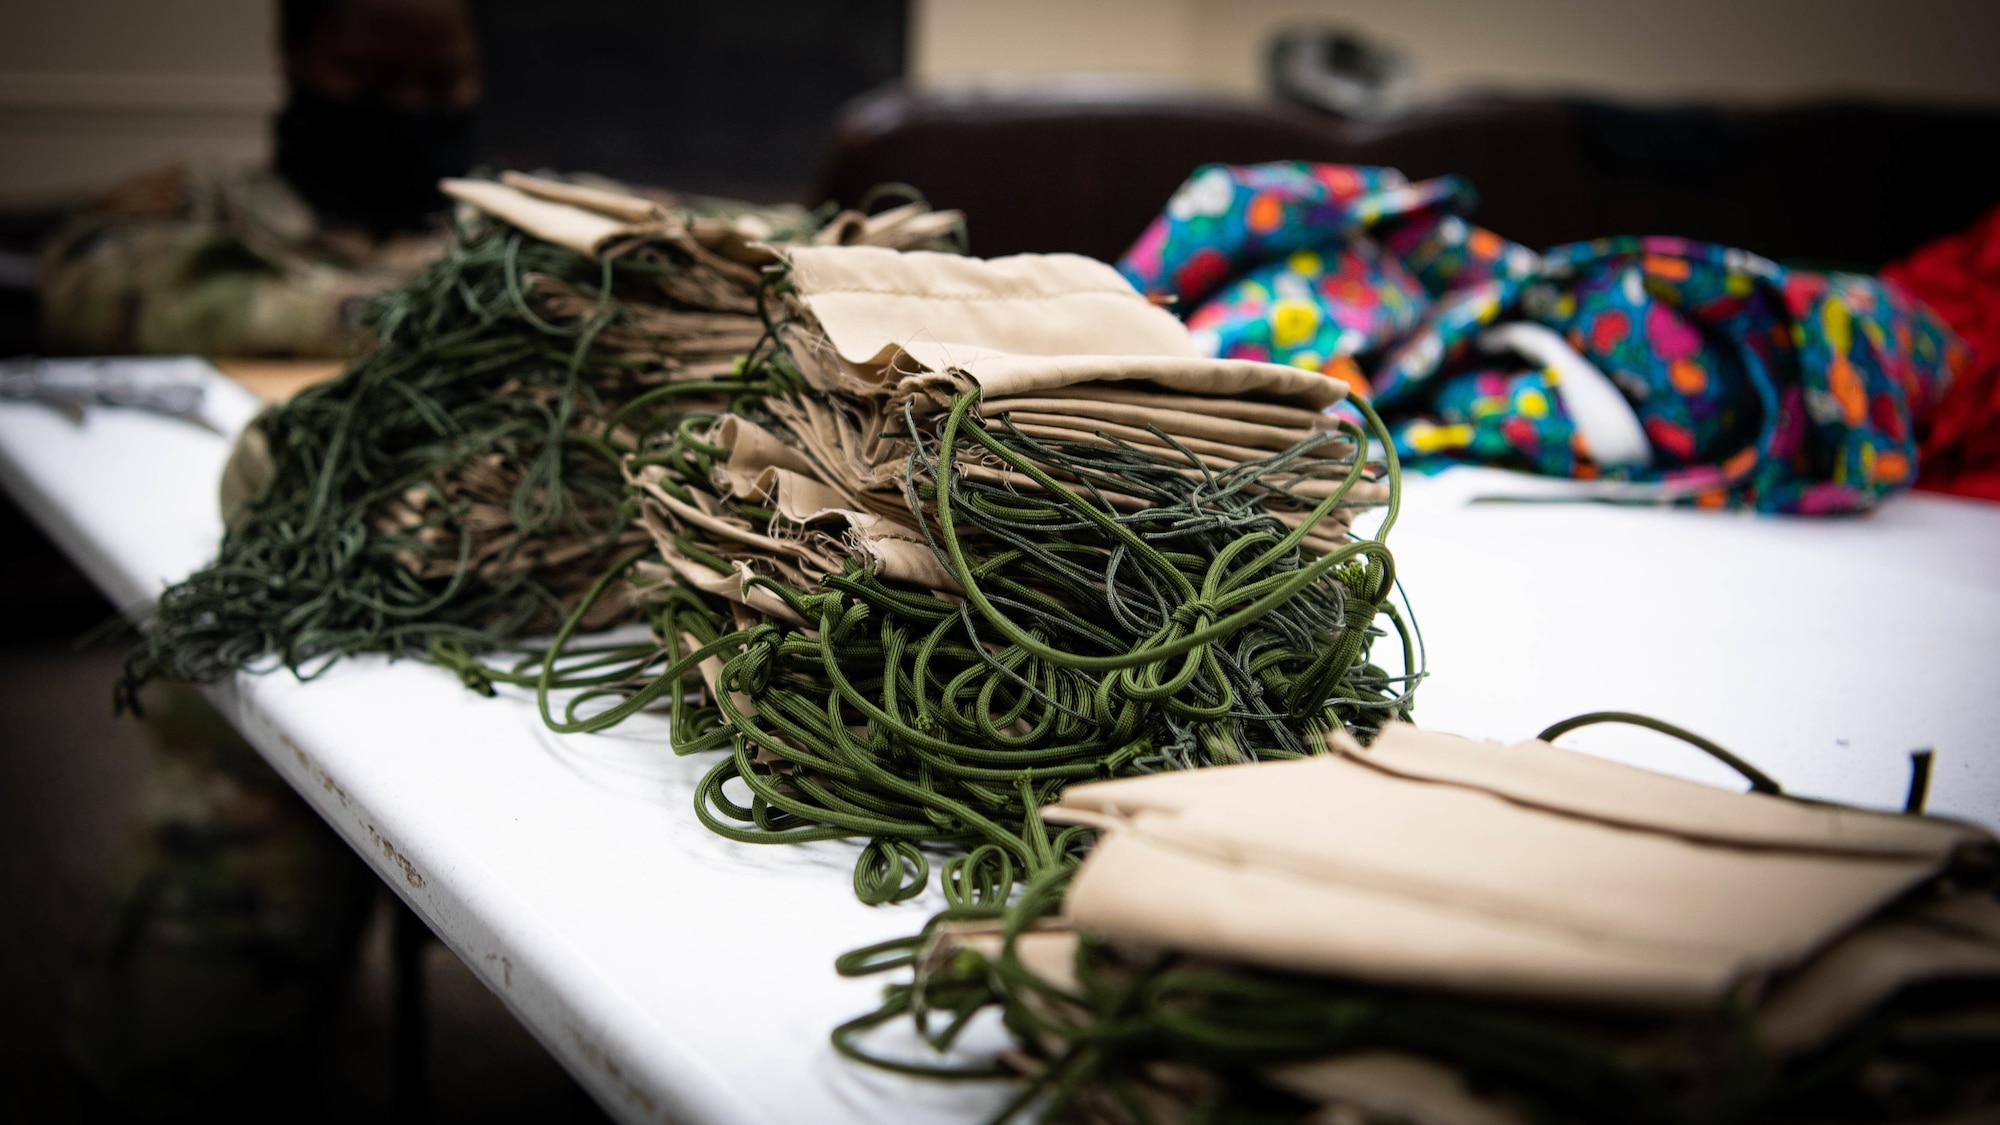 Completed face masks sewn by 2nd Operations Support Squadron Airmen are placed on a table at Barksdale Air Force Base, La., April 16, 2020. Mask making material has been donated by Barksdale residents and community partners. (U.S. Air Force photo by Airman 1st Class Jacob B. Wrightsman)